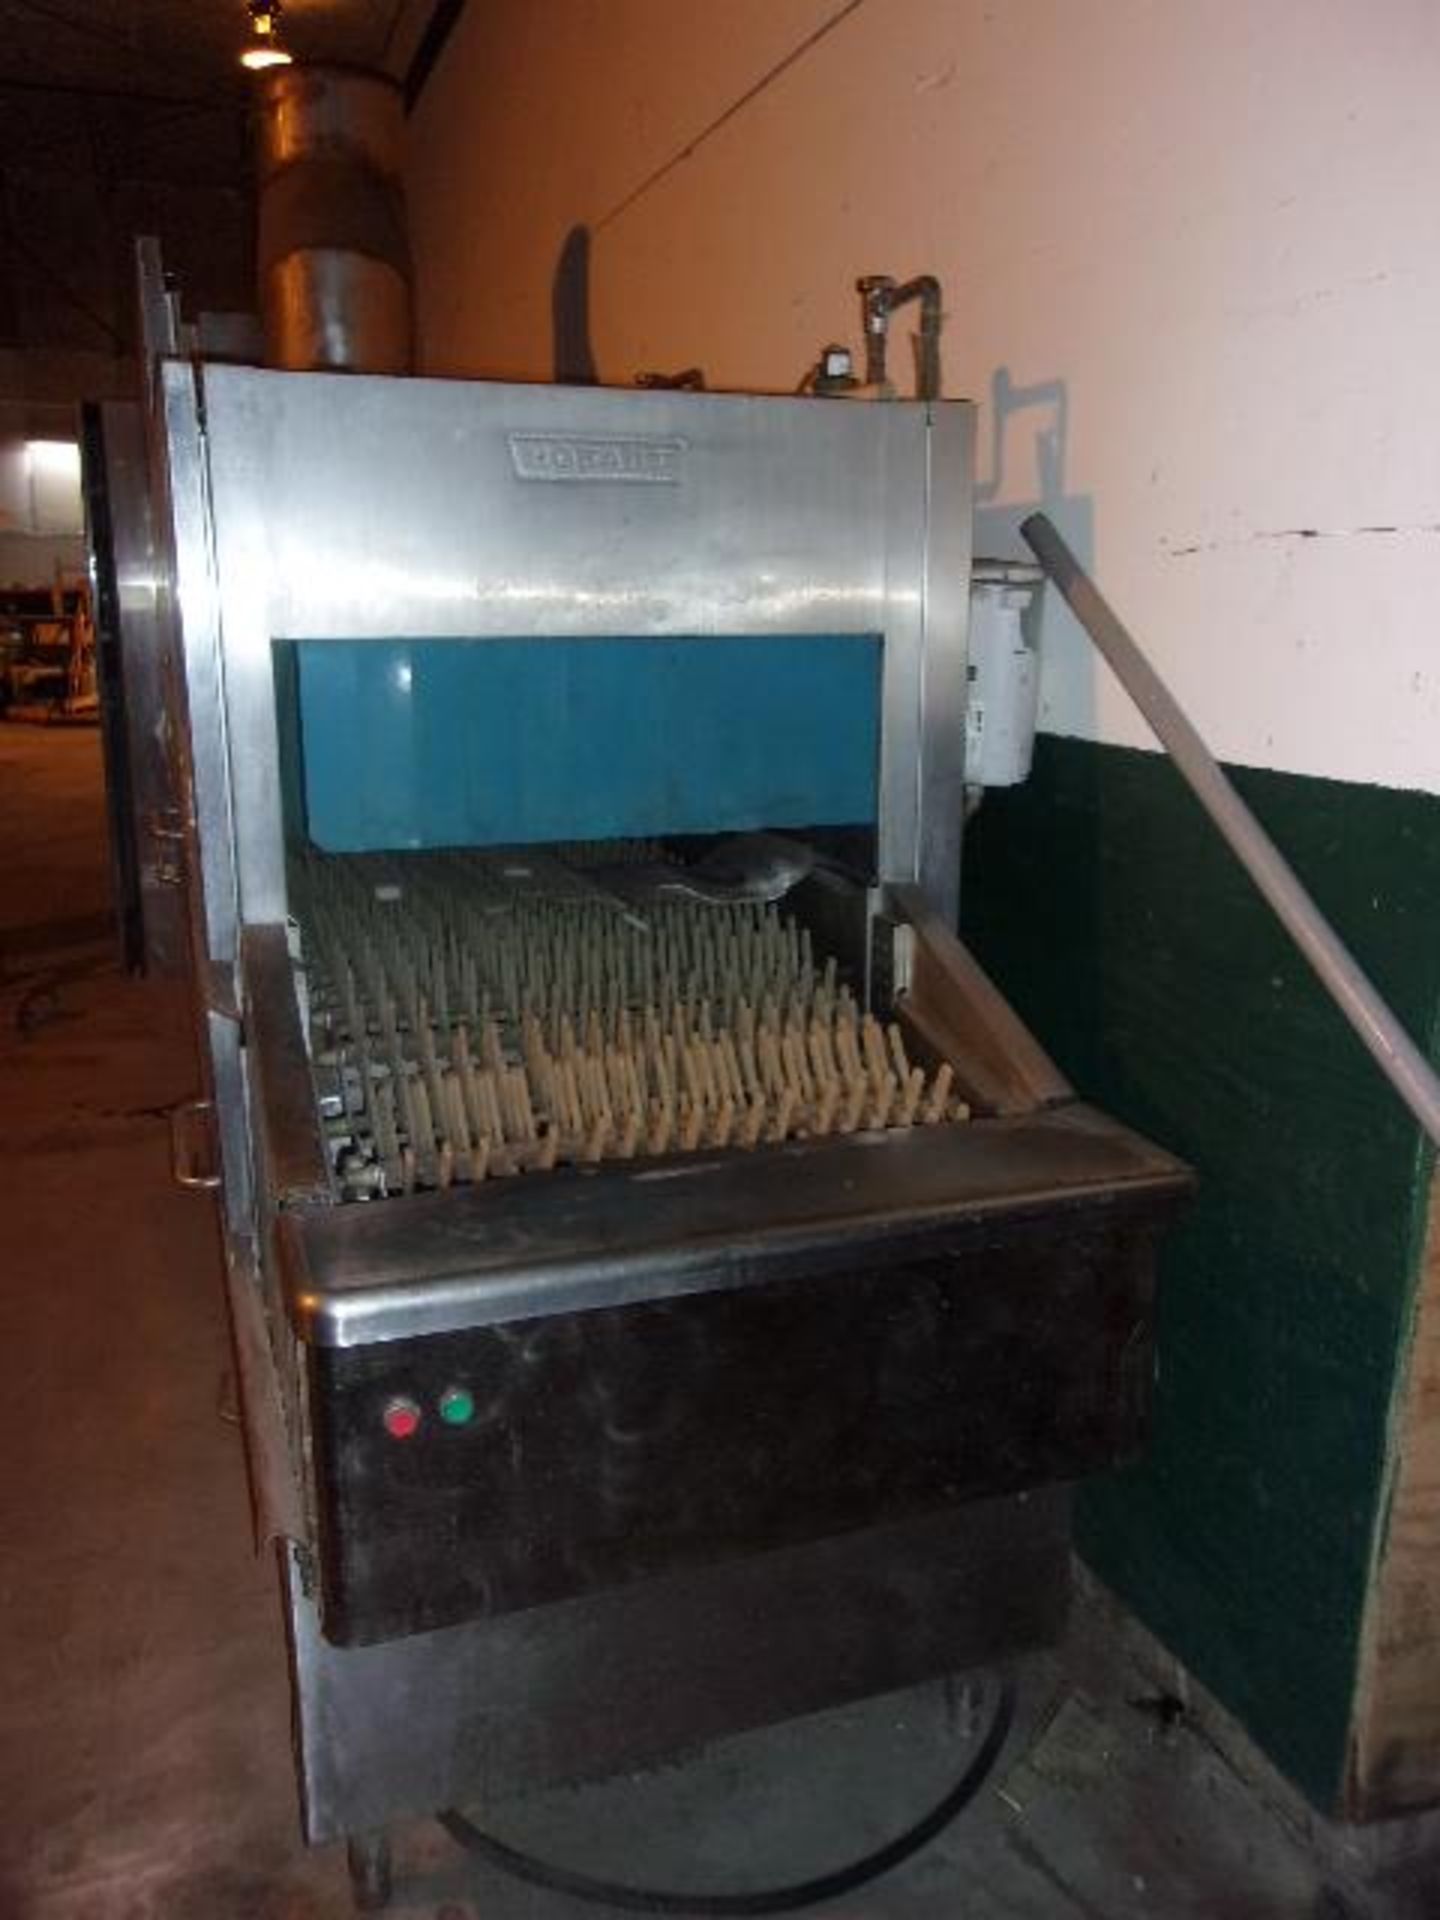 Hobart Dishwasher, Model FT900 with Tray Conveyor (Completely Refurbished) (Located Athens, OH - Image 4 of 5